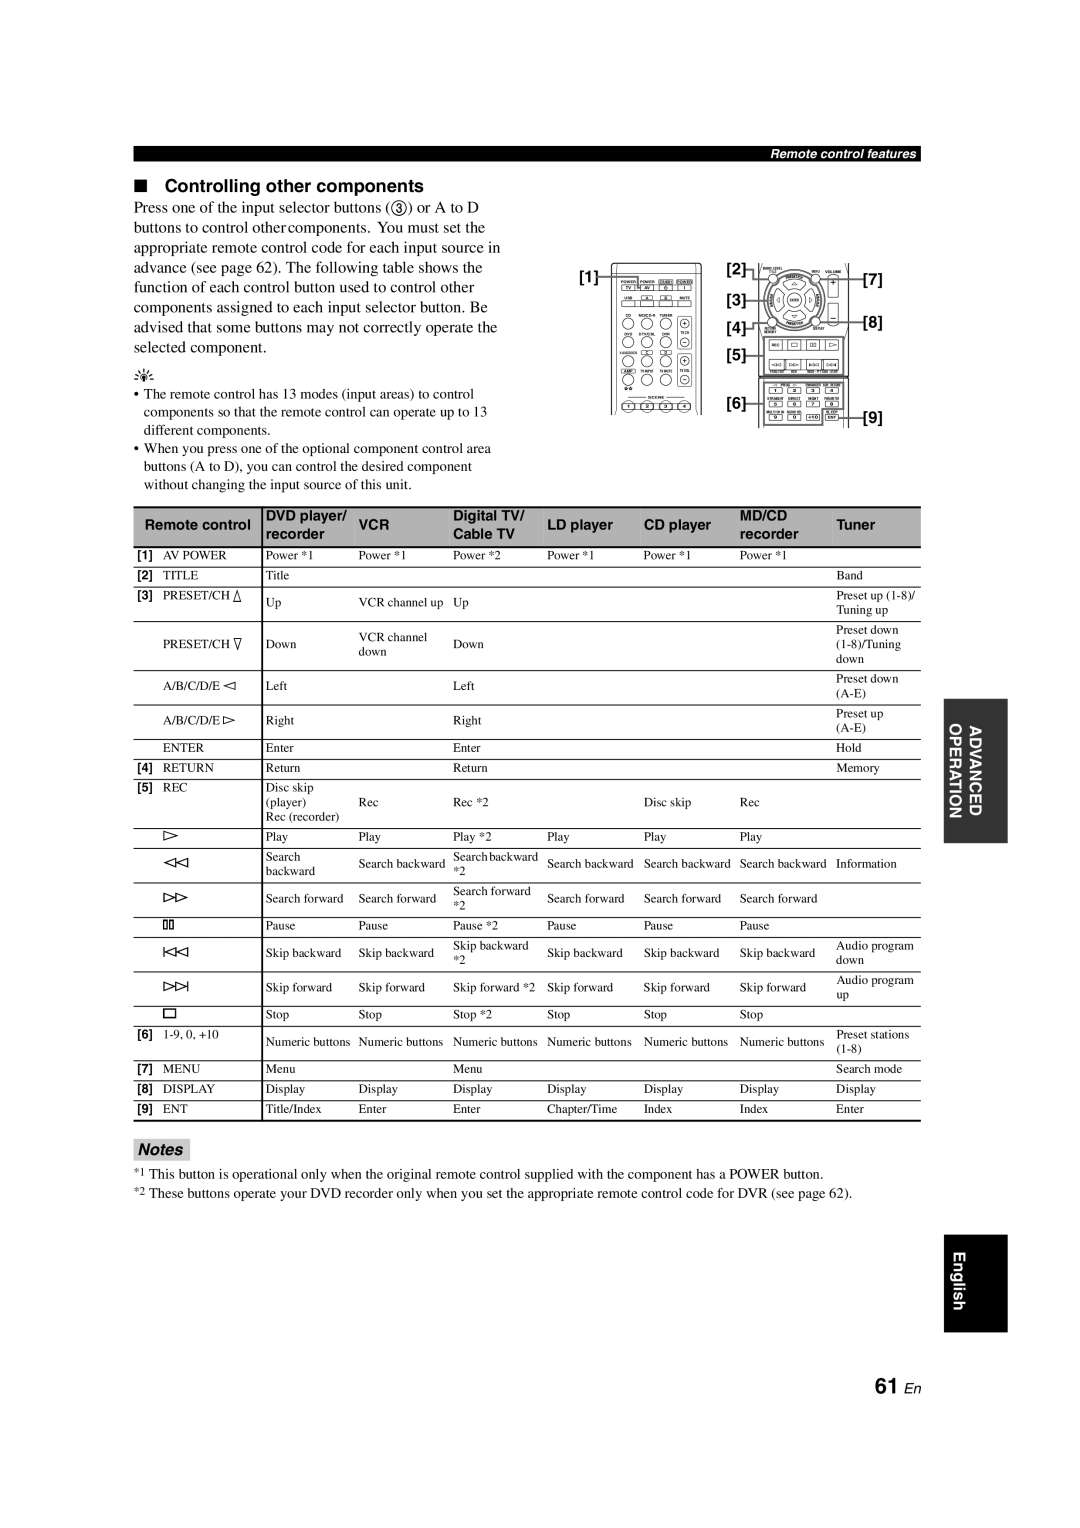 Yamaha DSP-AX463 owner manual 61 En, Controlling other components, selected component 